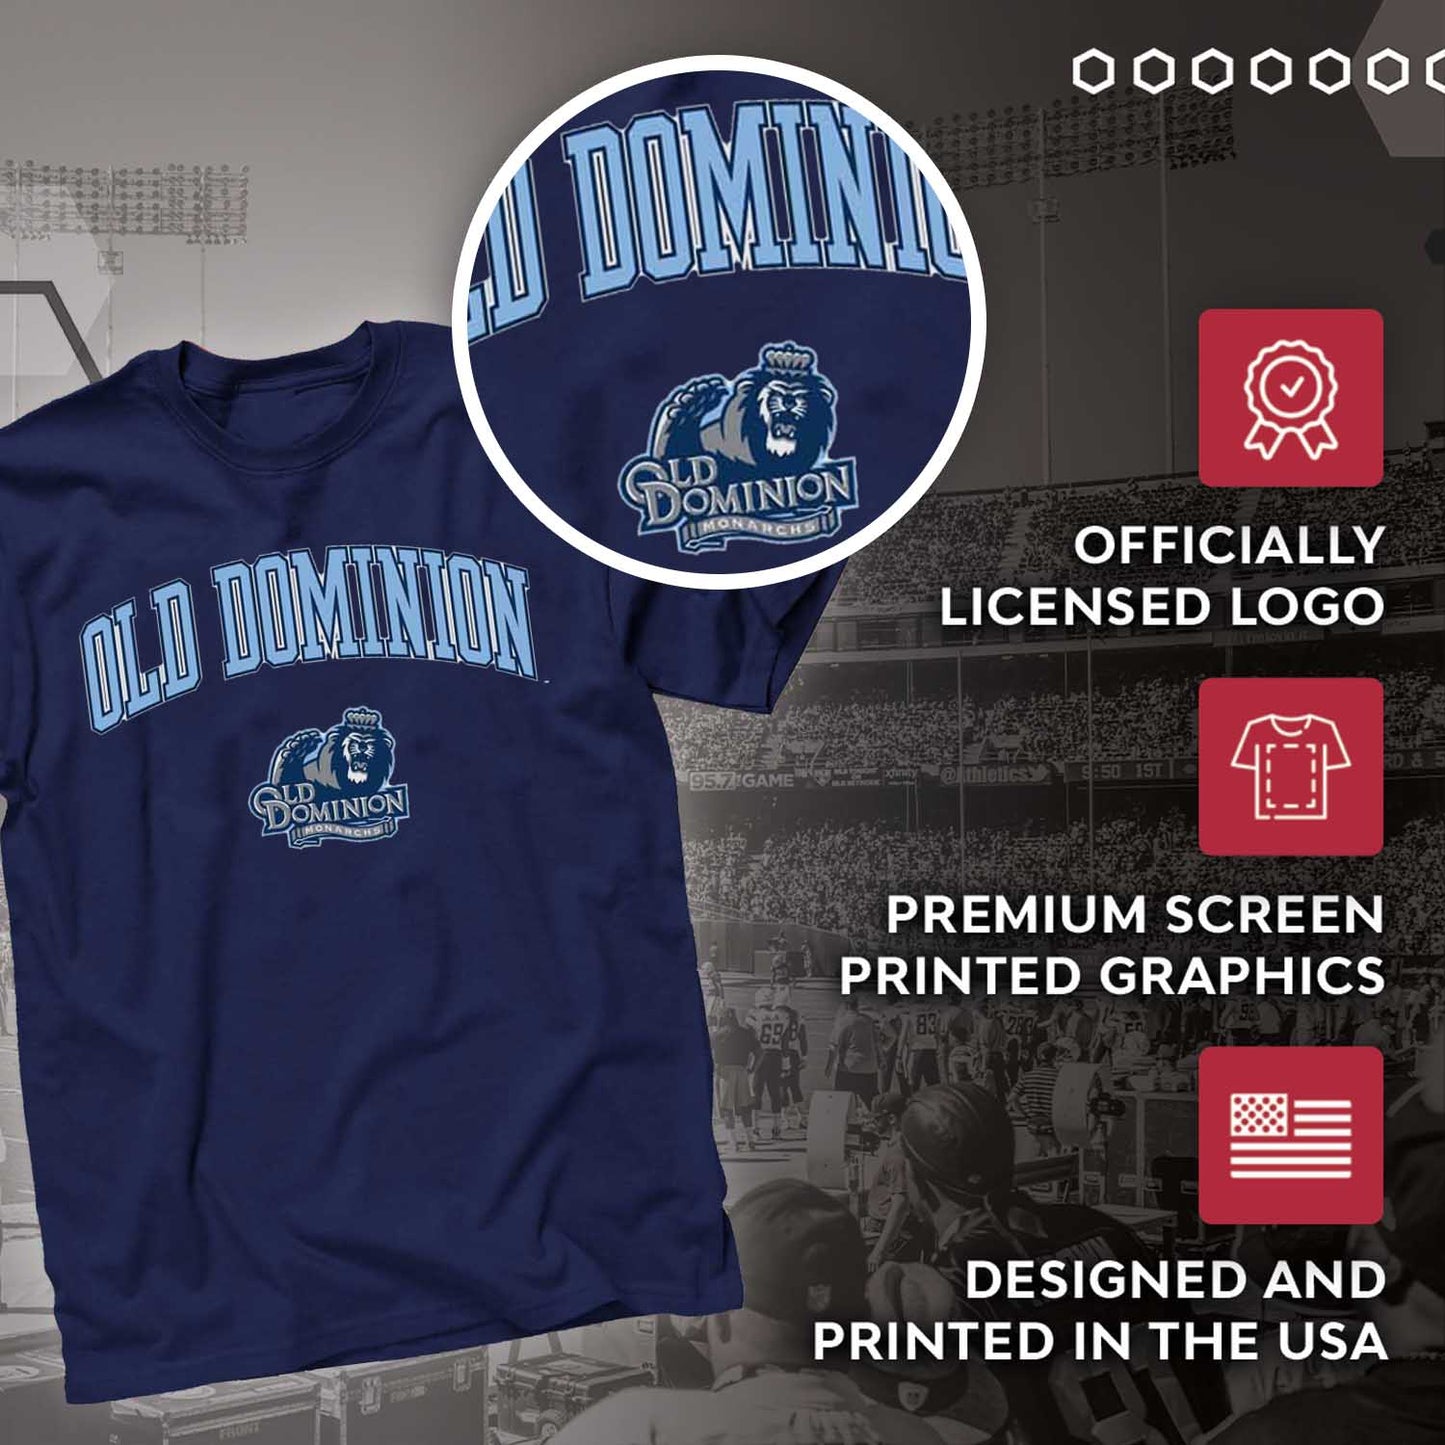 Old Dominion Monarchs NCAA Adult Gameday Cotton T-Shirt - Navy